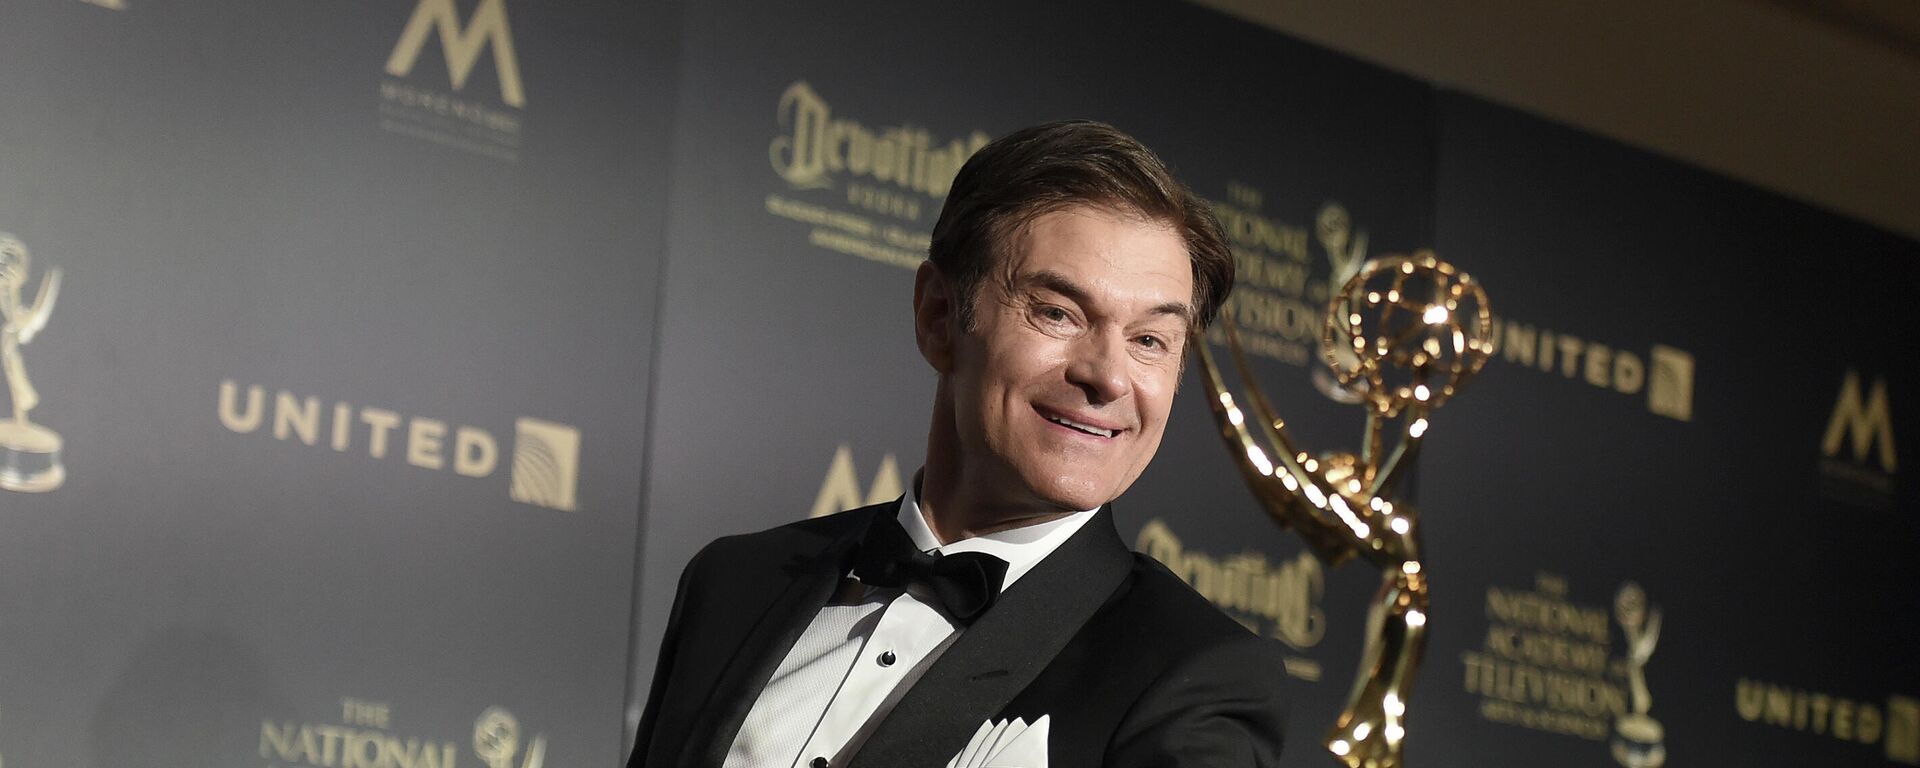 Dr. Mehmet Oz, winner of the award for outstanding informative talk show for The Dr. Oz Show, poses in the press room at the 44th annual Daytime Emmy Awards at the Pasadena Civic Center on Sunday, April 30, 2017, in Pasadena, Calif.  - Sputnik International, 1920, 04.12.2021